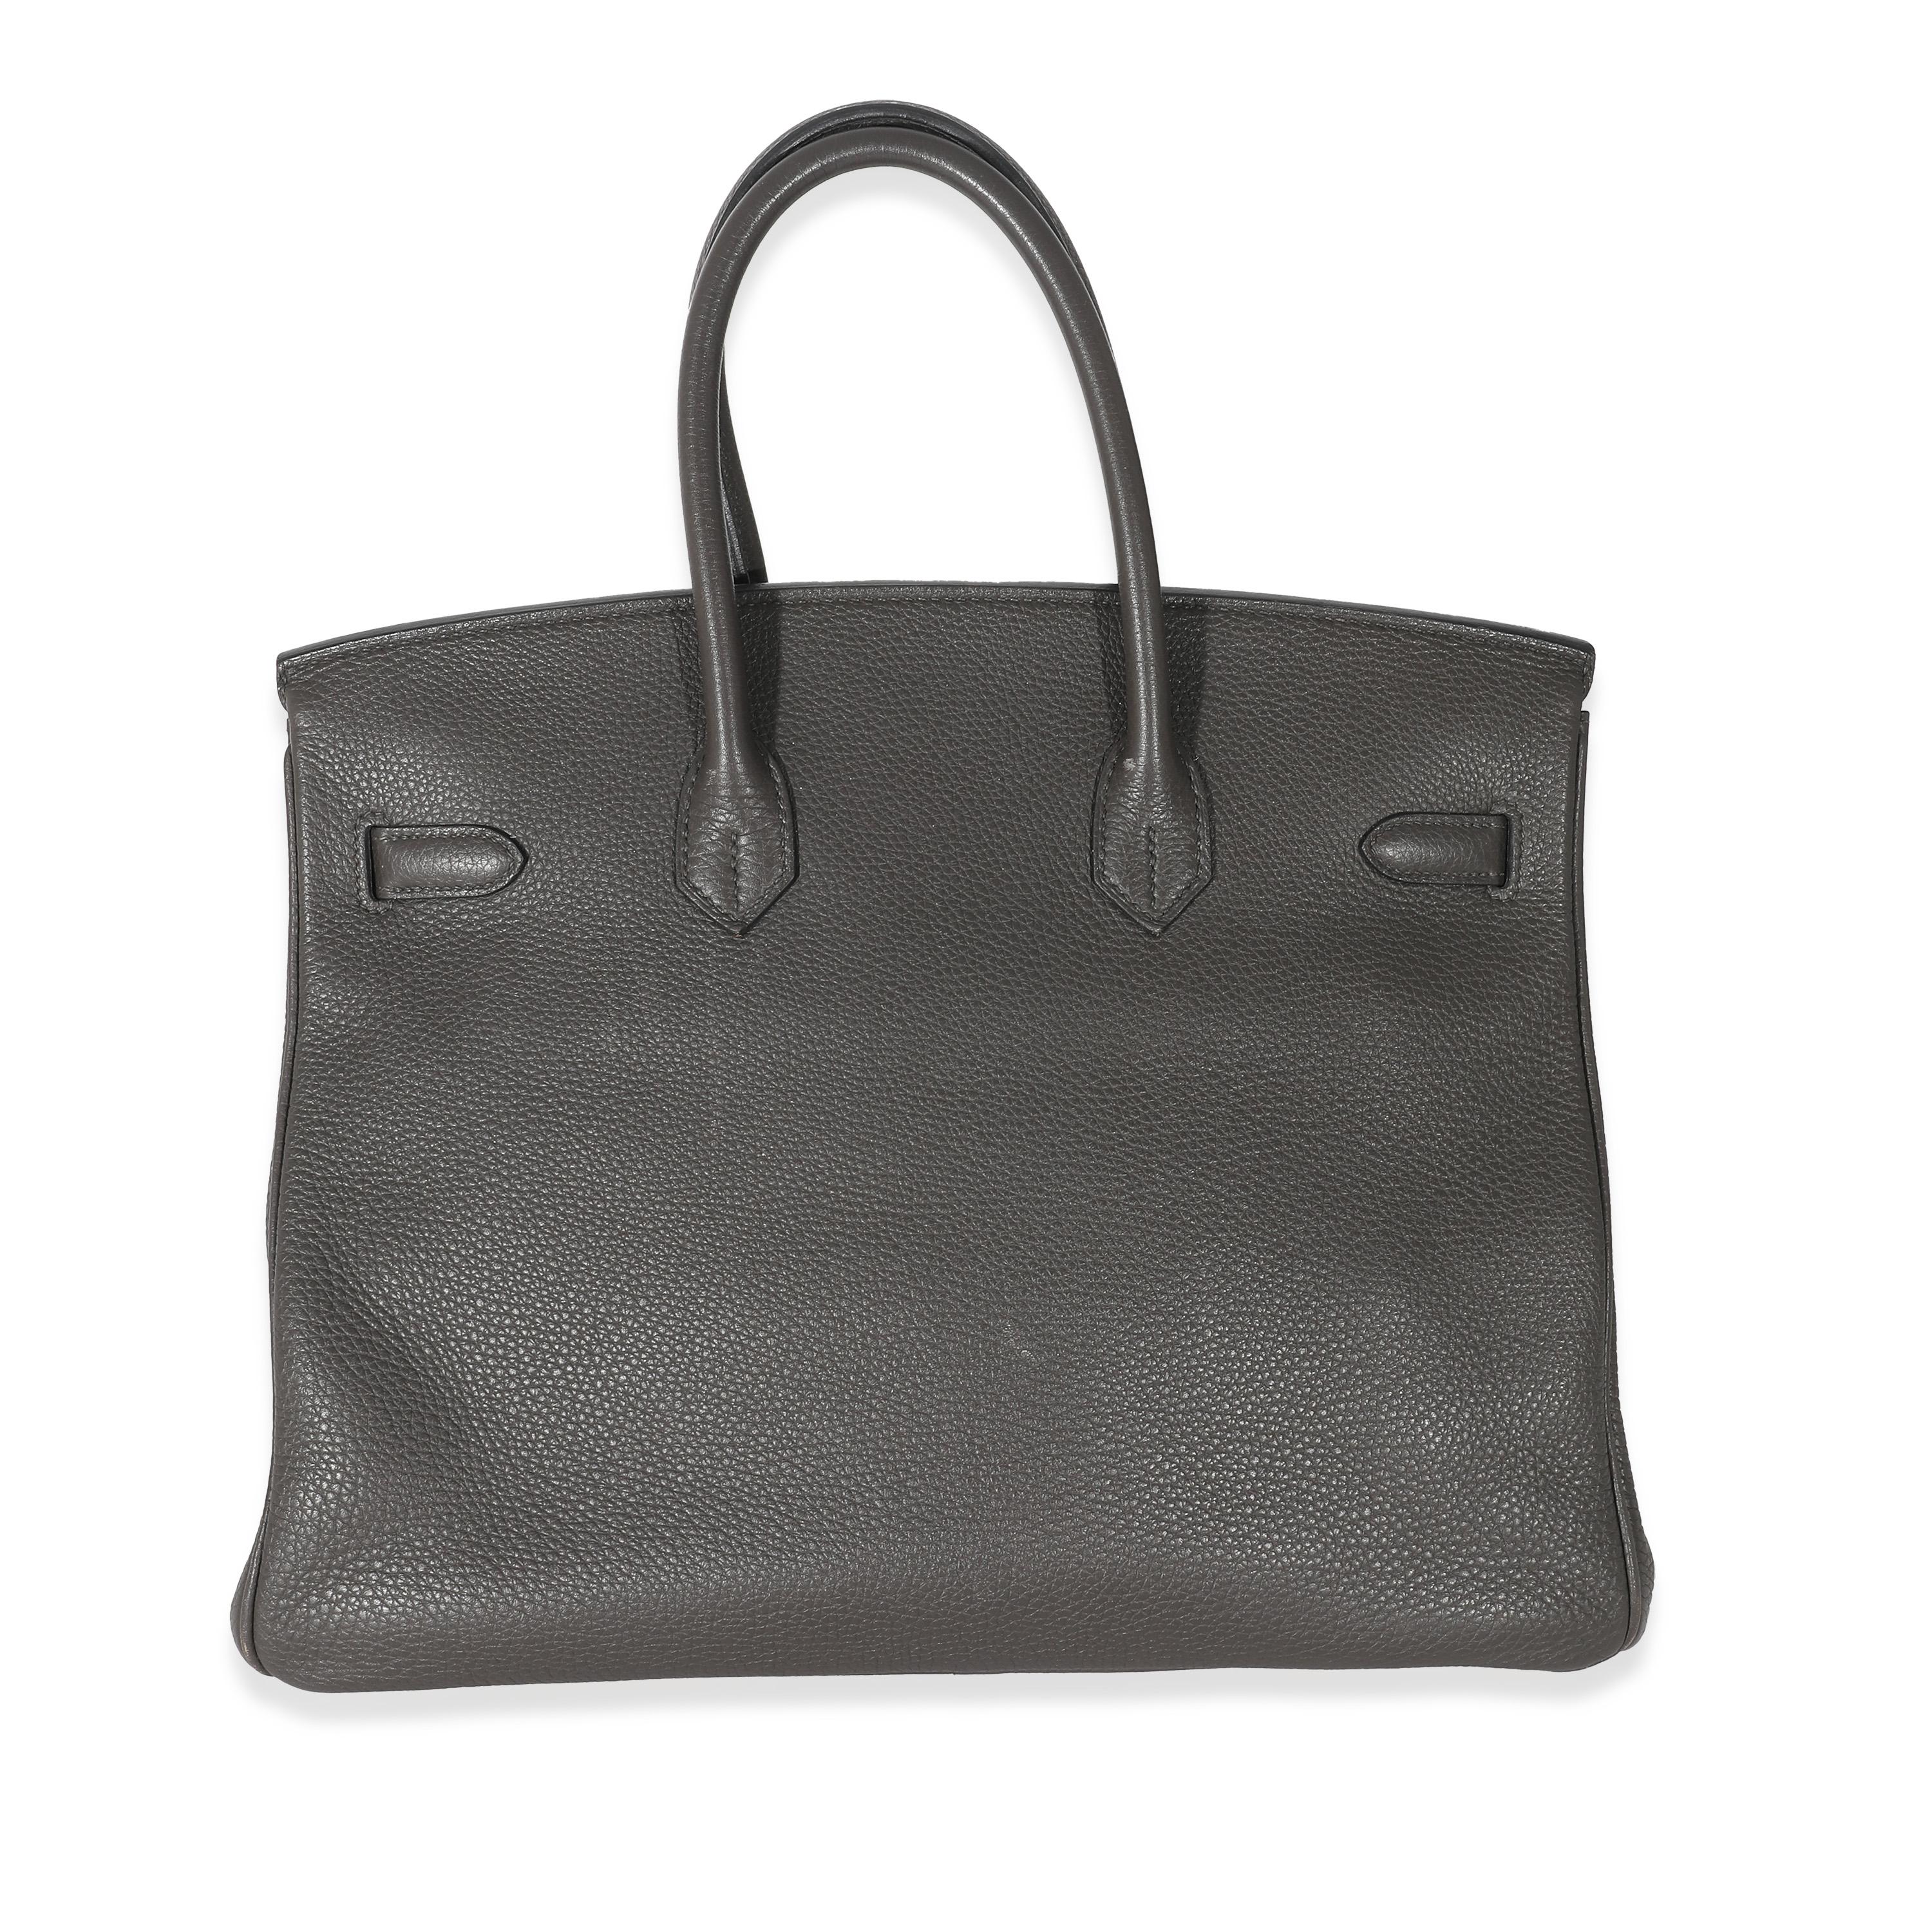 Listing Title: Hermes Etain Clemence Birkin 35 PHW
SKU: 133868
Condition: Pre-owned 
Handbag Condition: Very Good
Condition Comments: Item is in very good condition with minor signs of wear. Exterior scuffing along lining and throughout body. Light